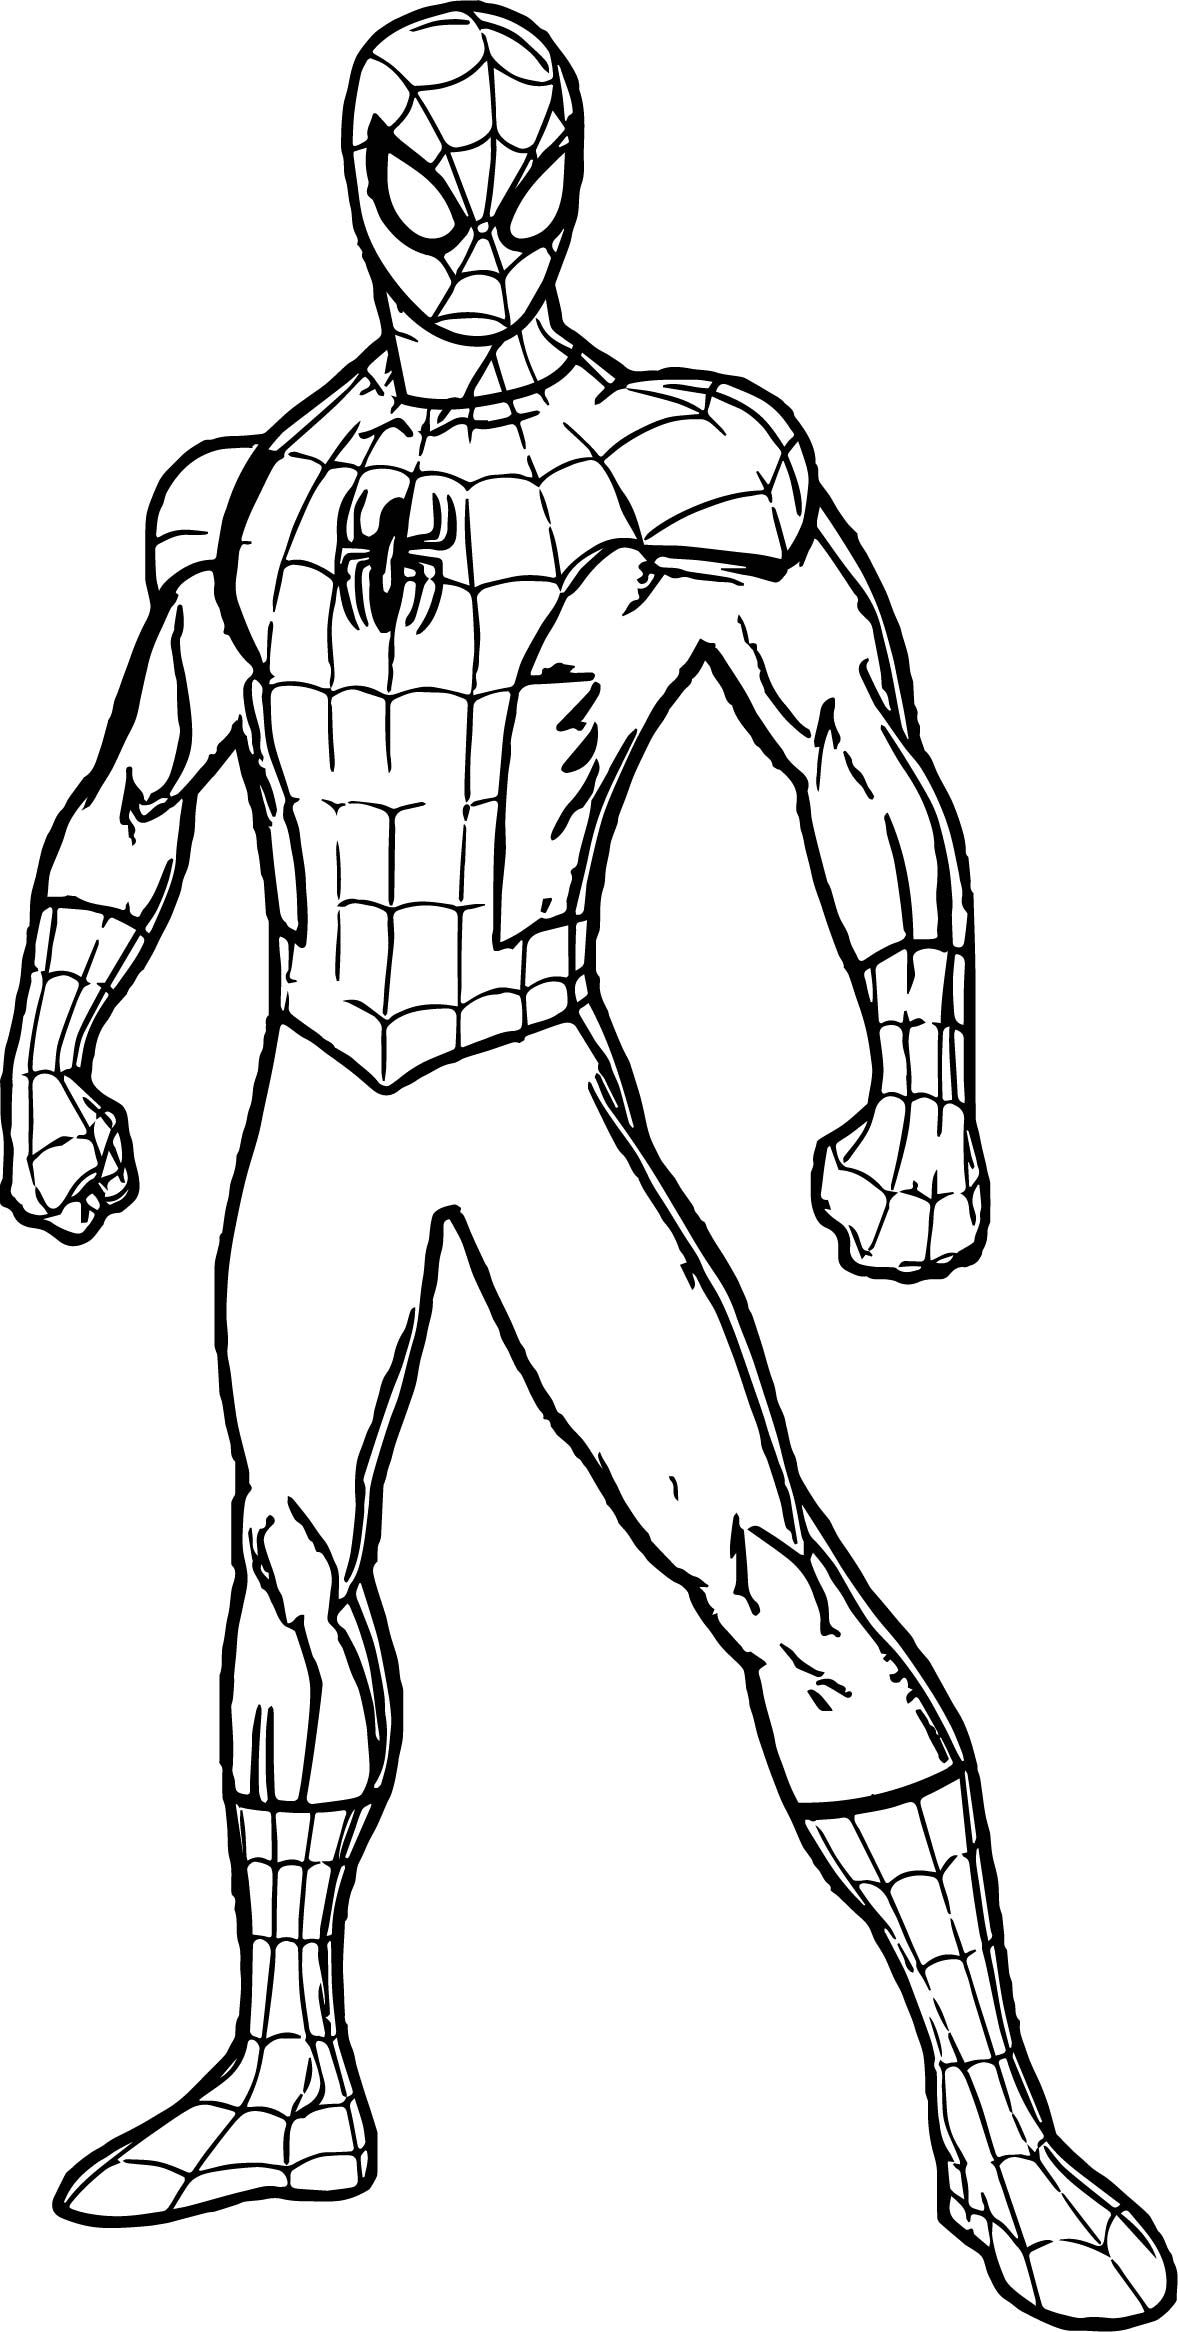 Nice spidey spider man coloring page spiderman coloring avengers coloring pag superhero coloring pag